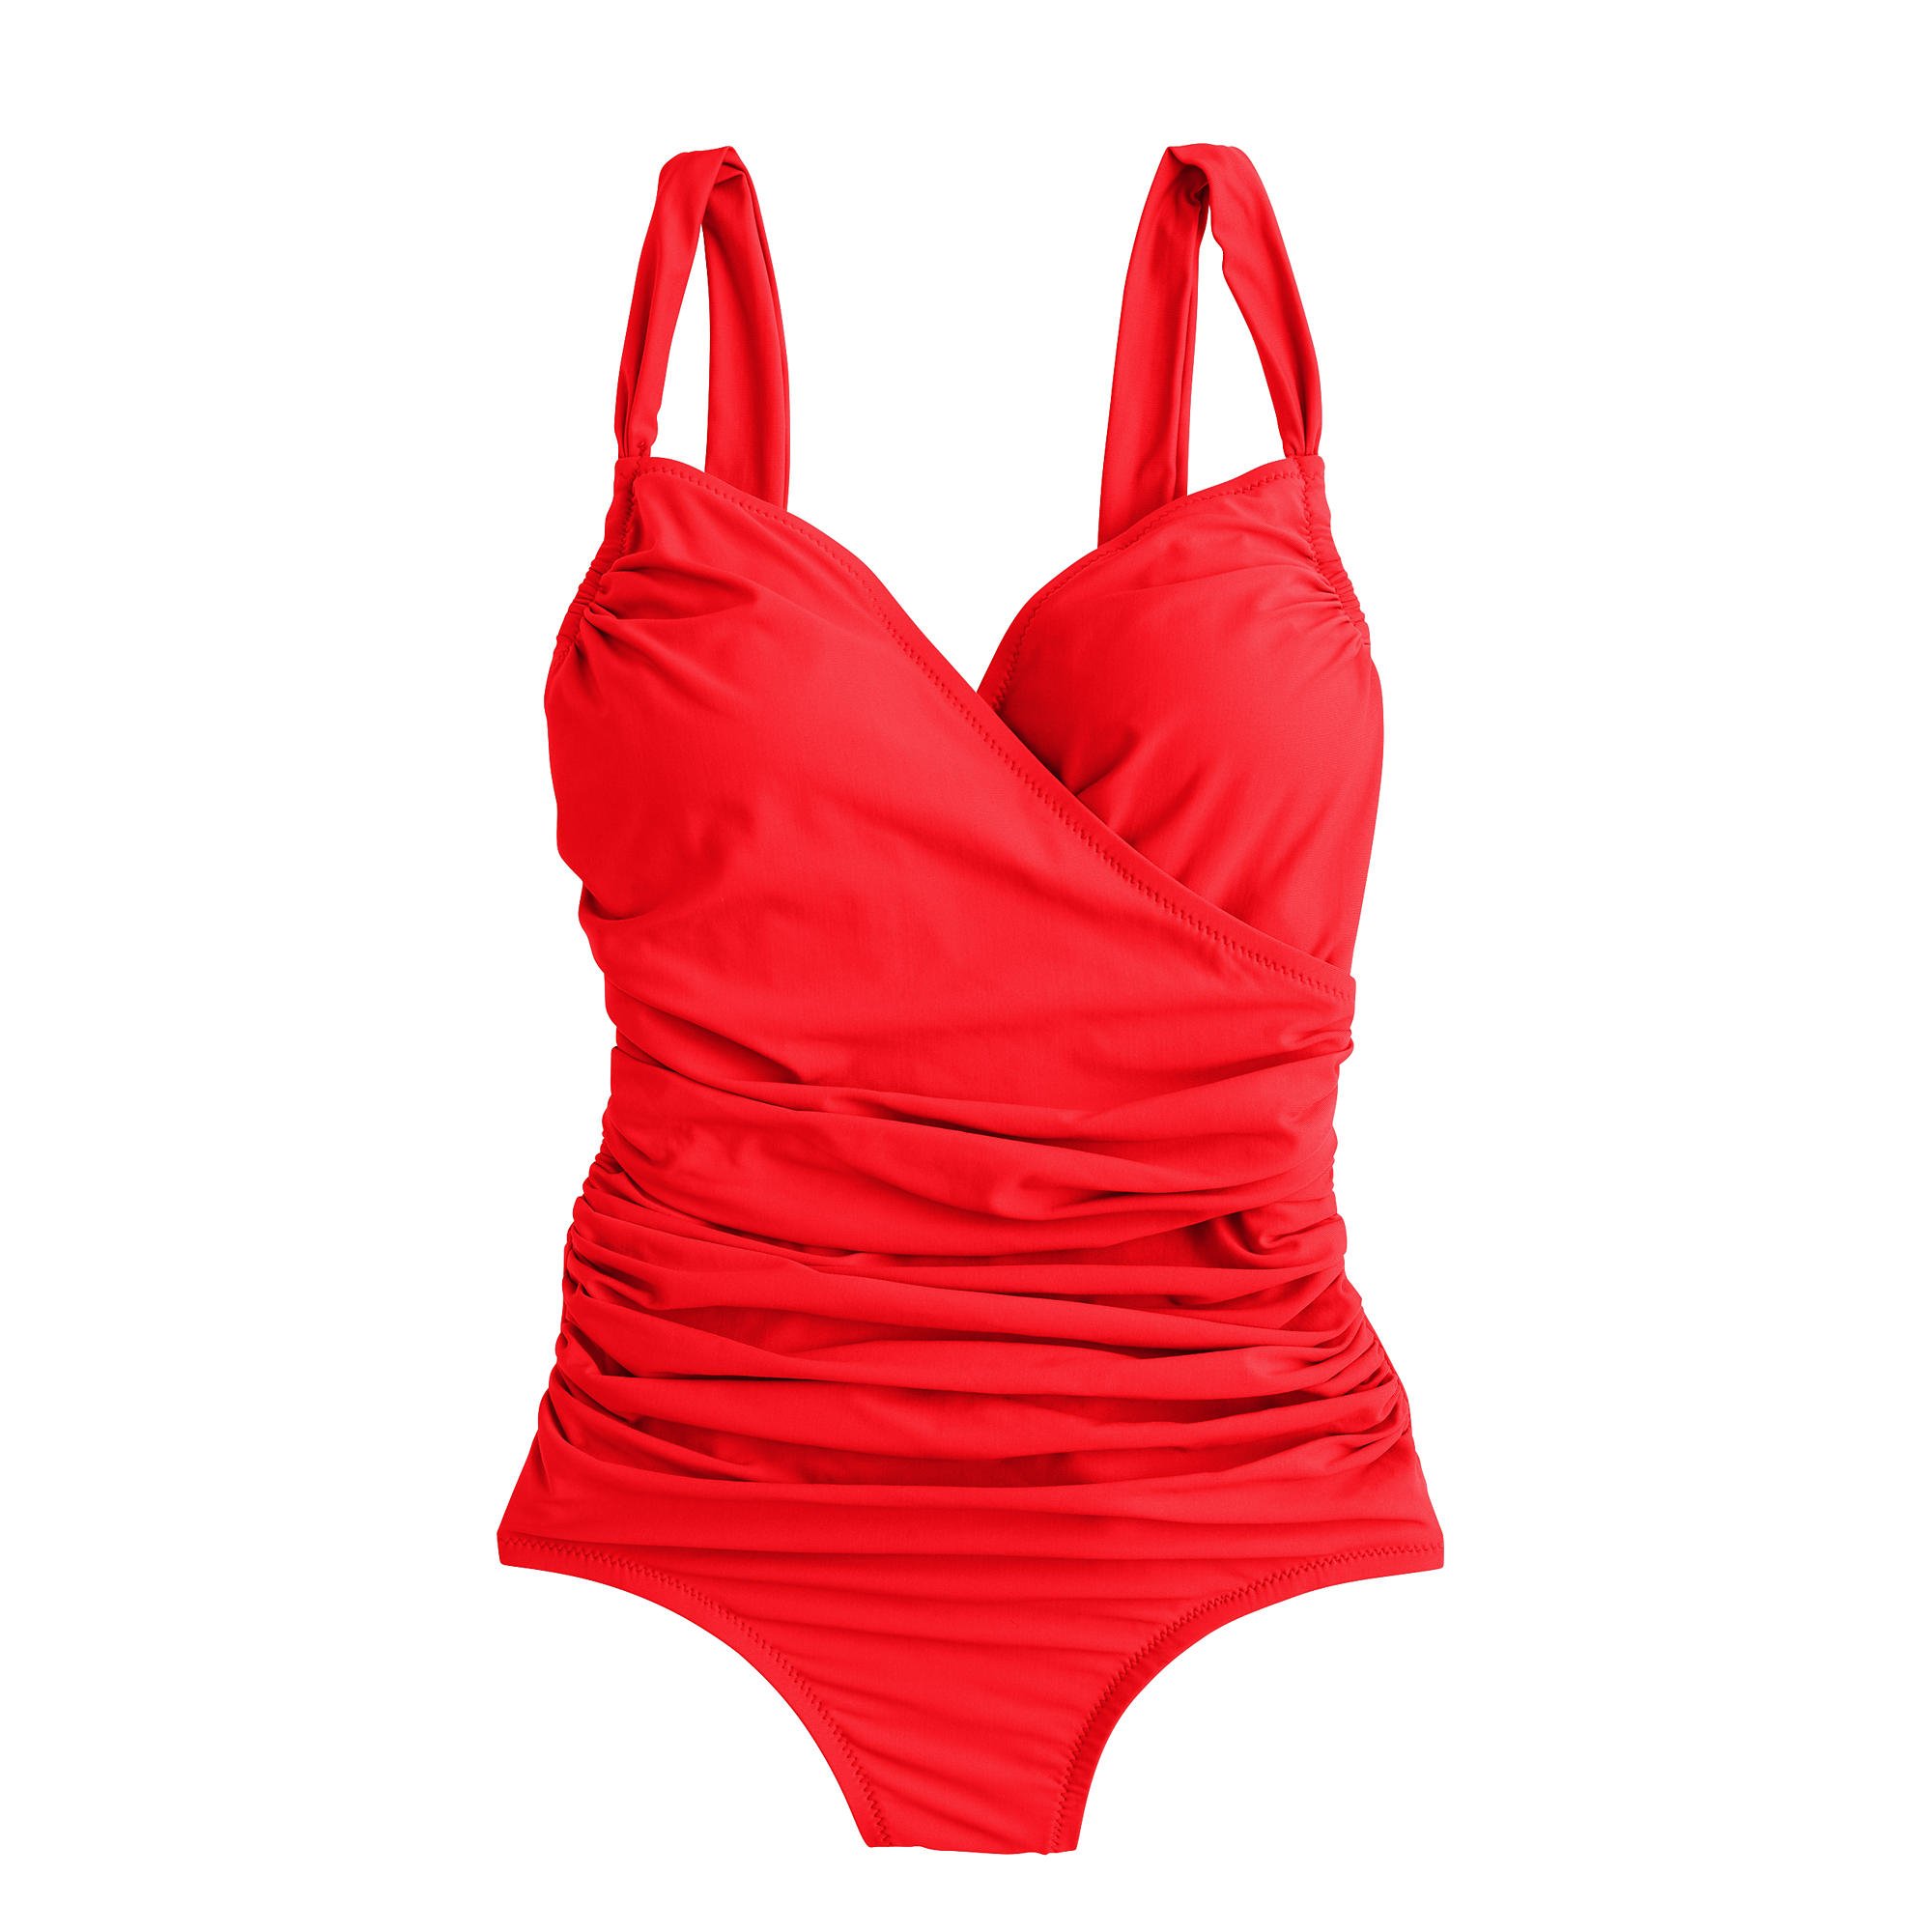 J.crew Ruched Wrap One-piece Swimsuit in Red (belvedere red) | Lyst